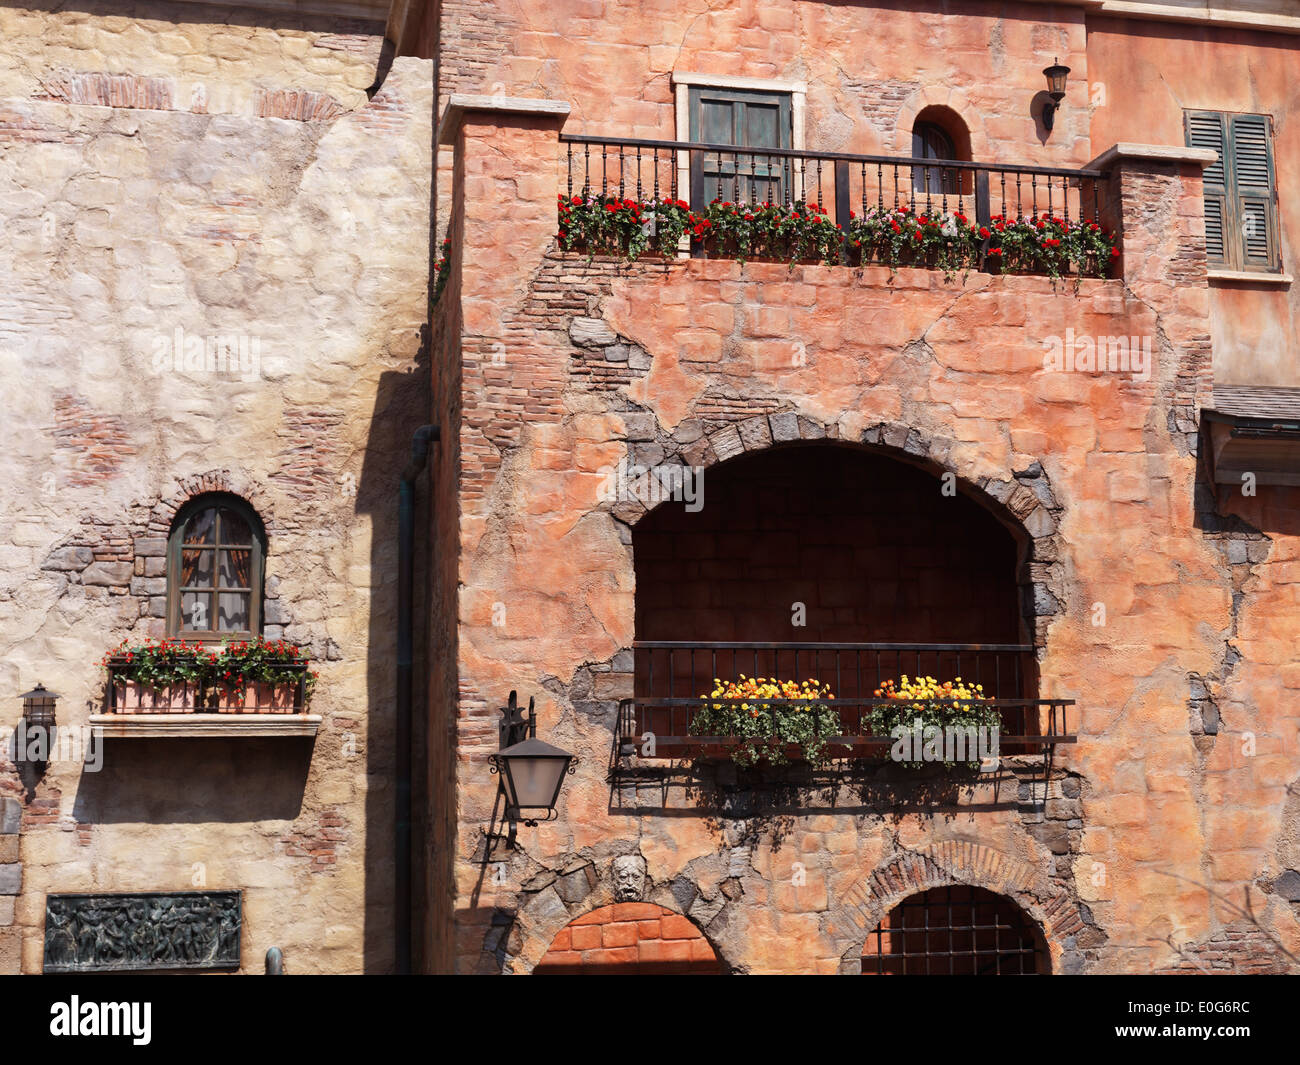 Antique Italian architecture details, old house balconies and windows with flowers Stock Photo